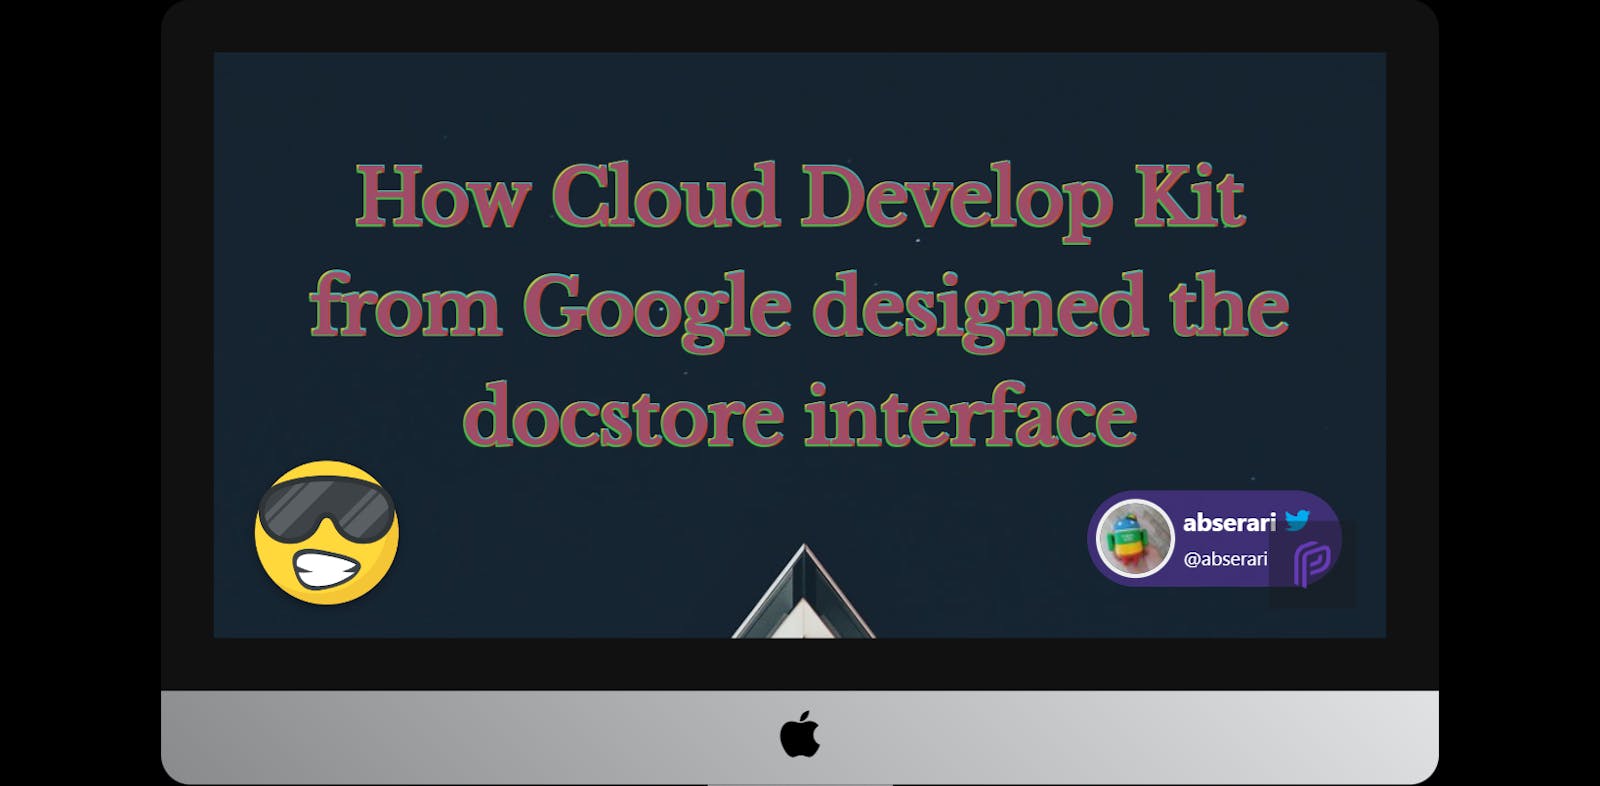 How Cloud Develop Kit from Google designed the docstore interface